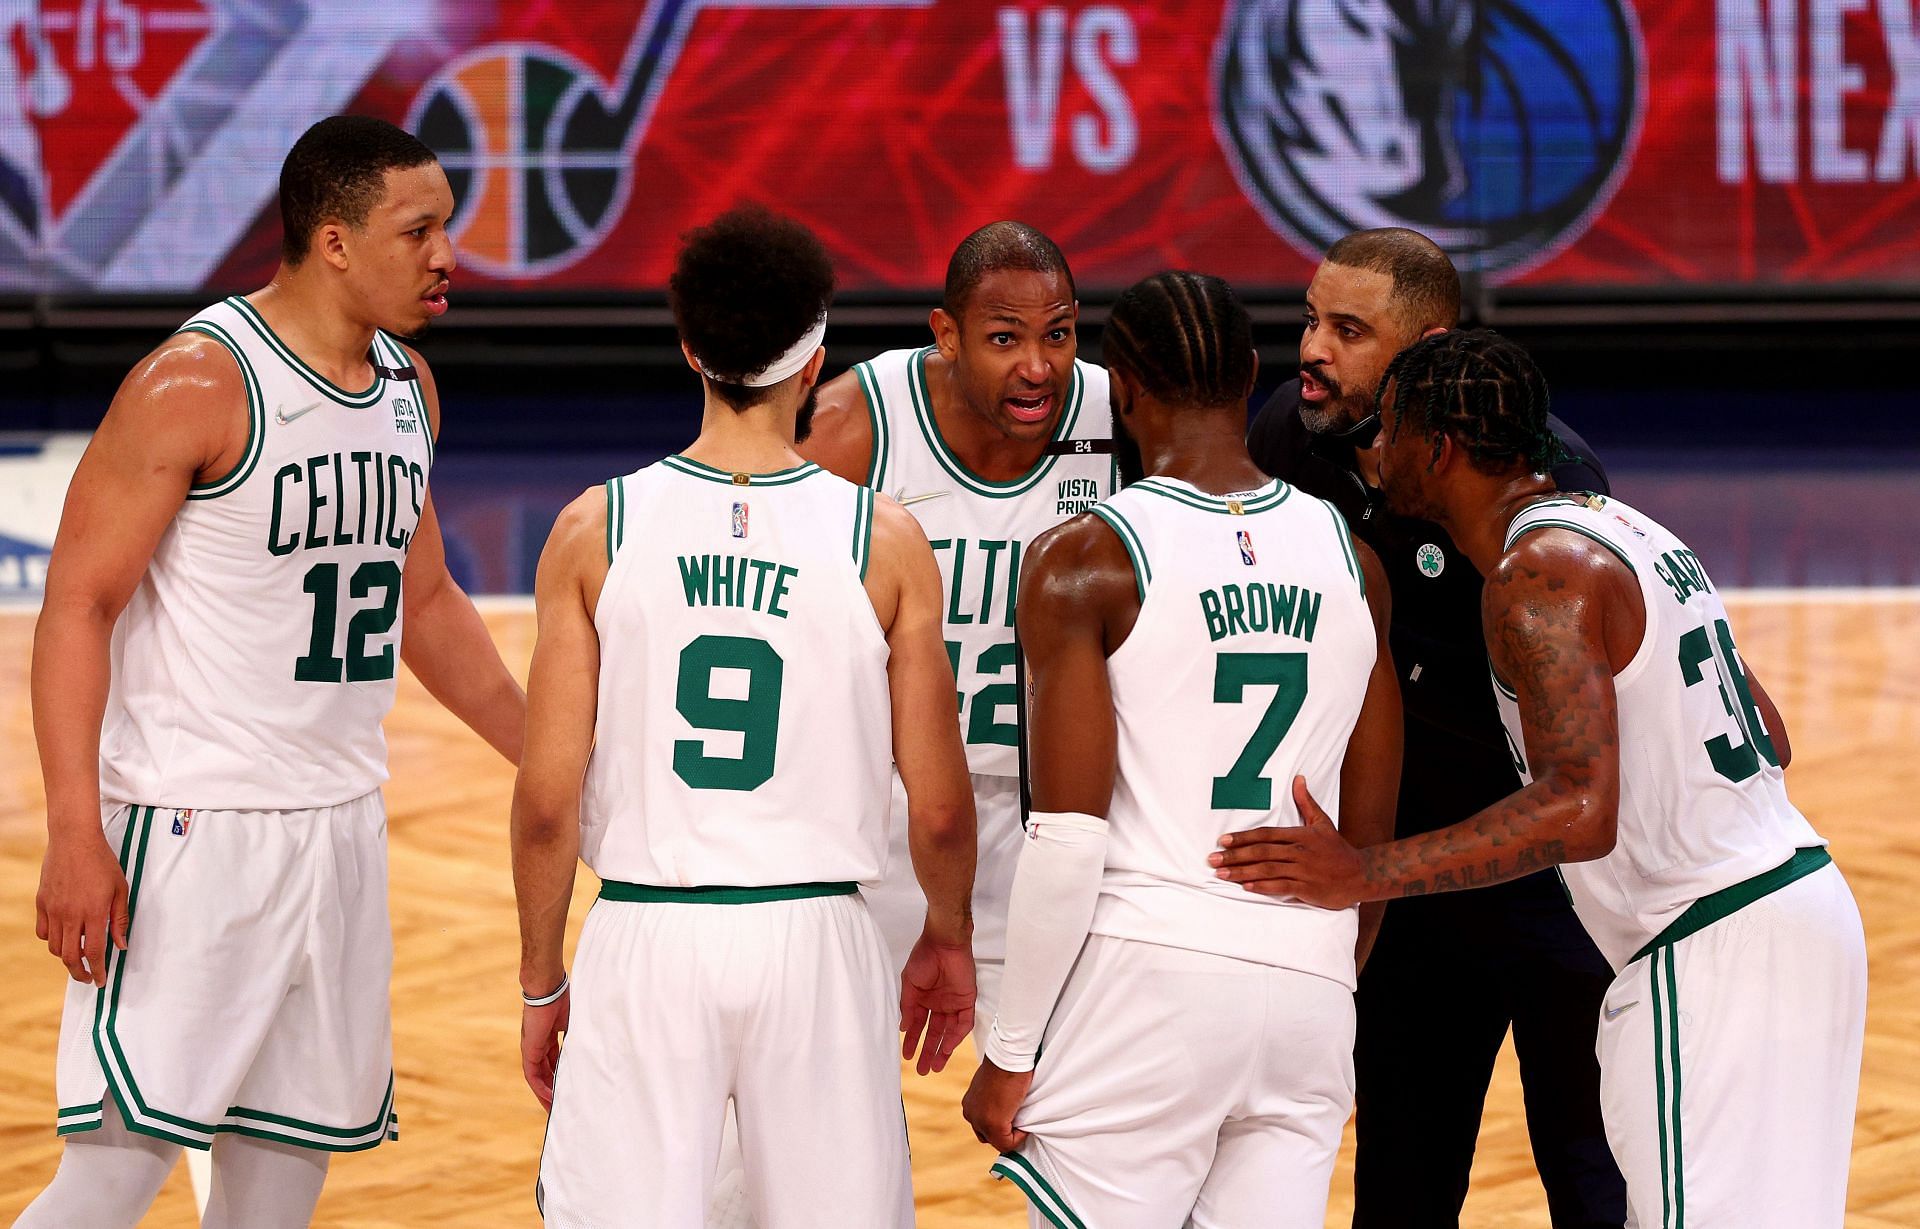 The Celtics are the favorites heading into their second-round series with the Bucks in the NBA playoffs